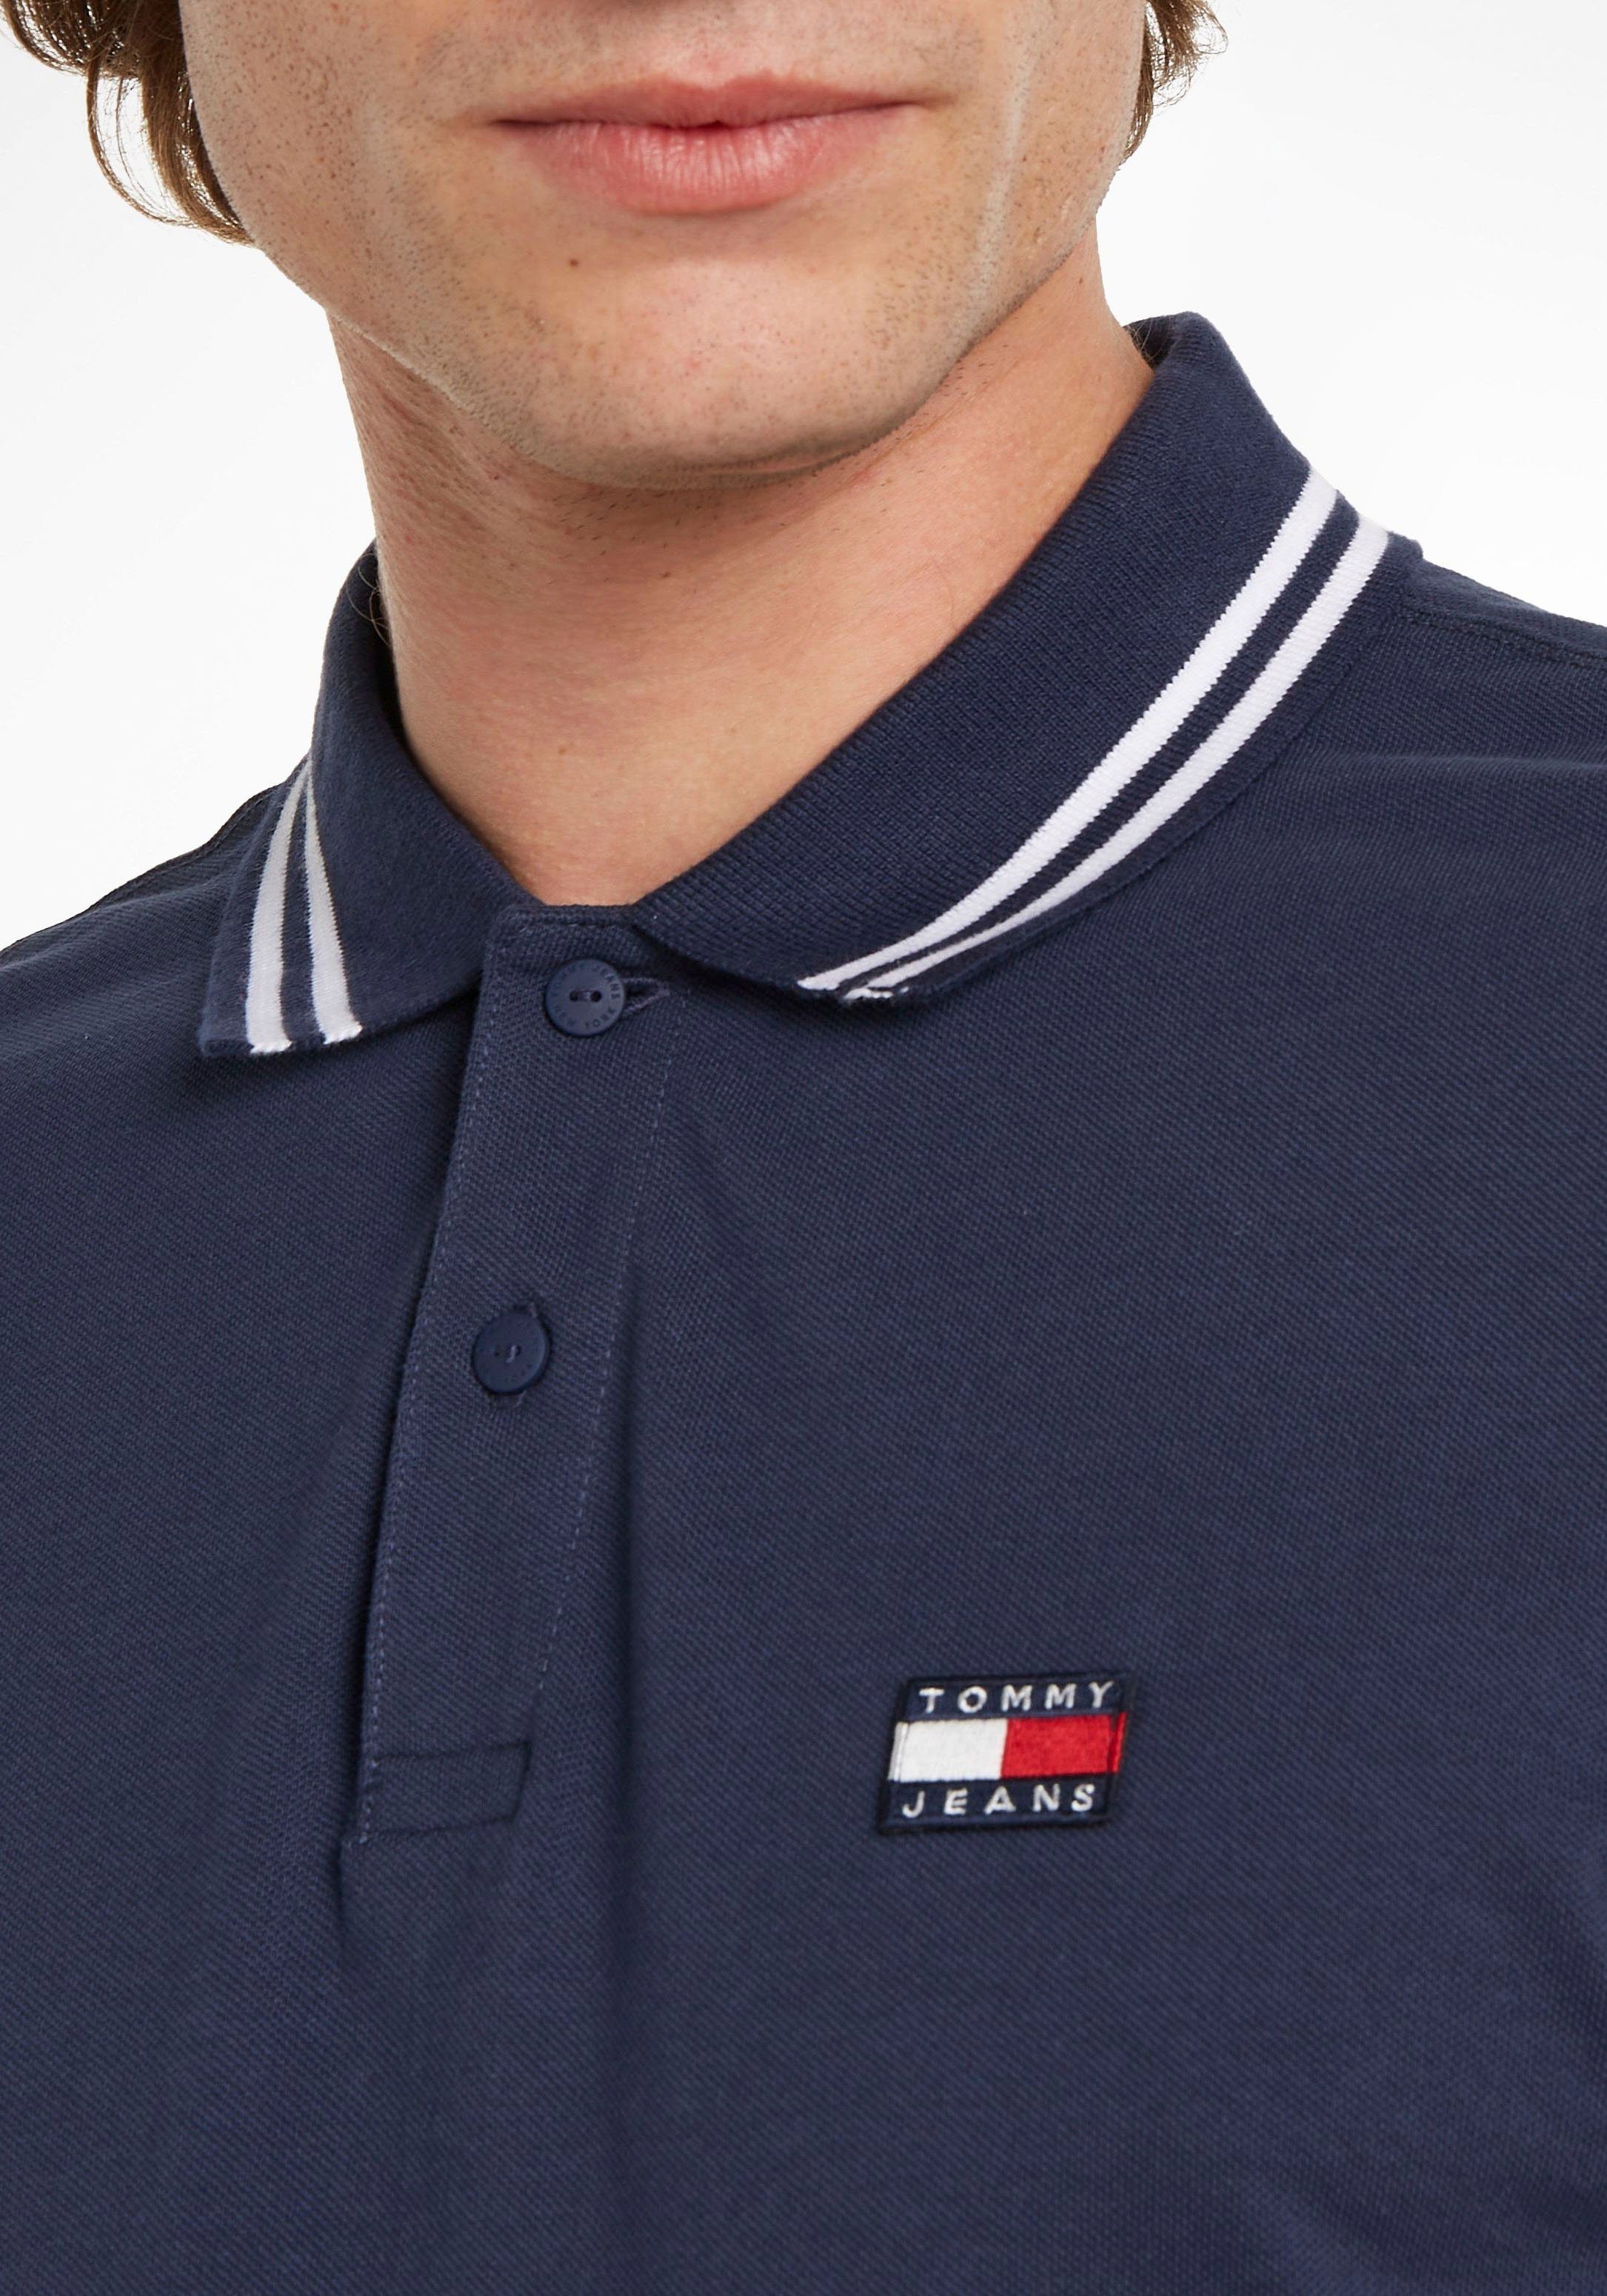 TJM Navy Twilight Jeans POLO CLSC TIPPING DETAIL Tommy Poloshirt